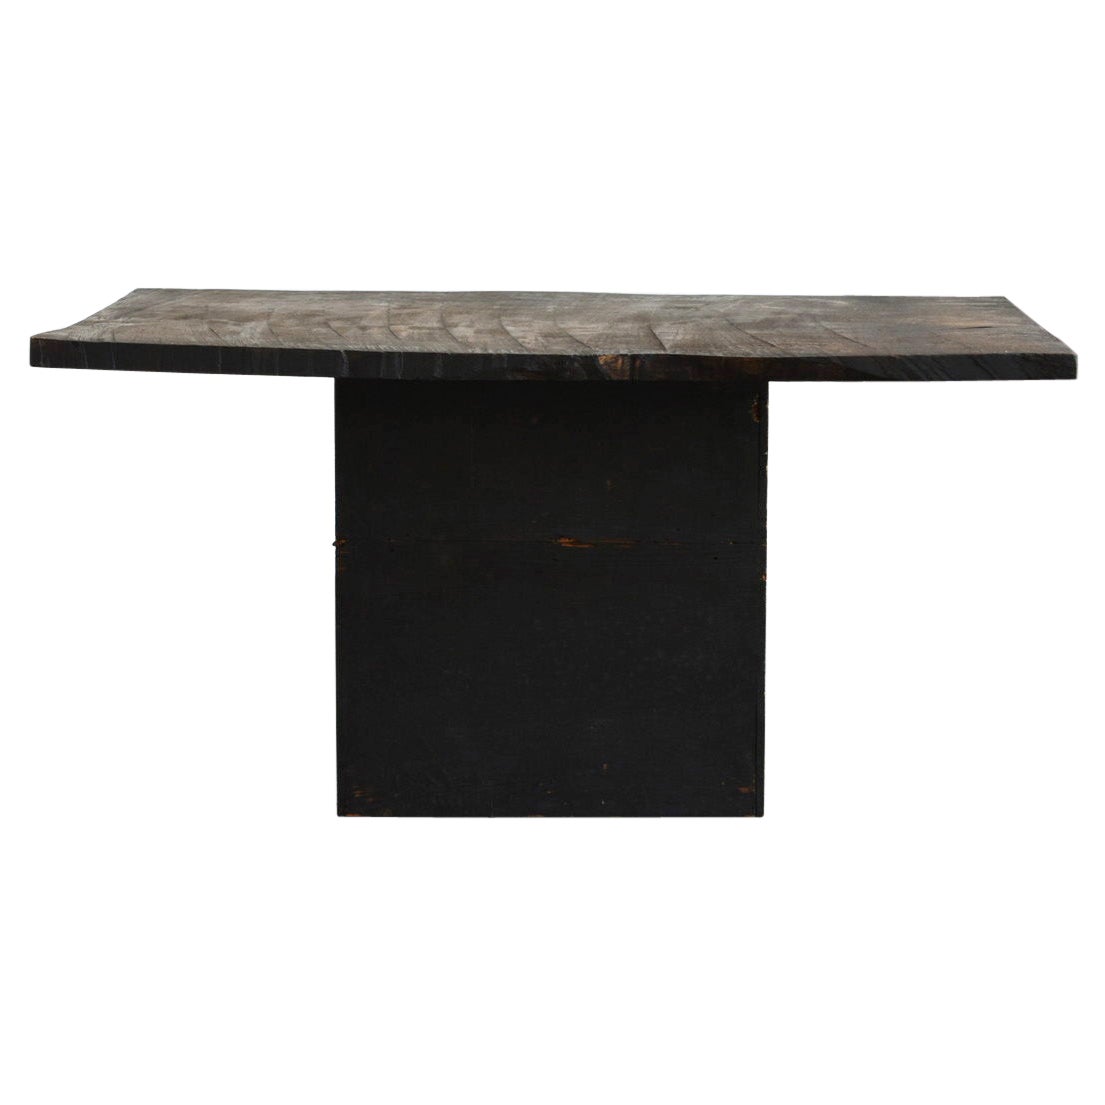 Japanese Antique Wooden Black Coffee Table / 1868-1920 / Low Table / Sofa Table For Sale